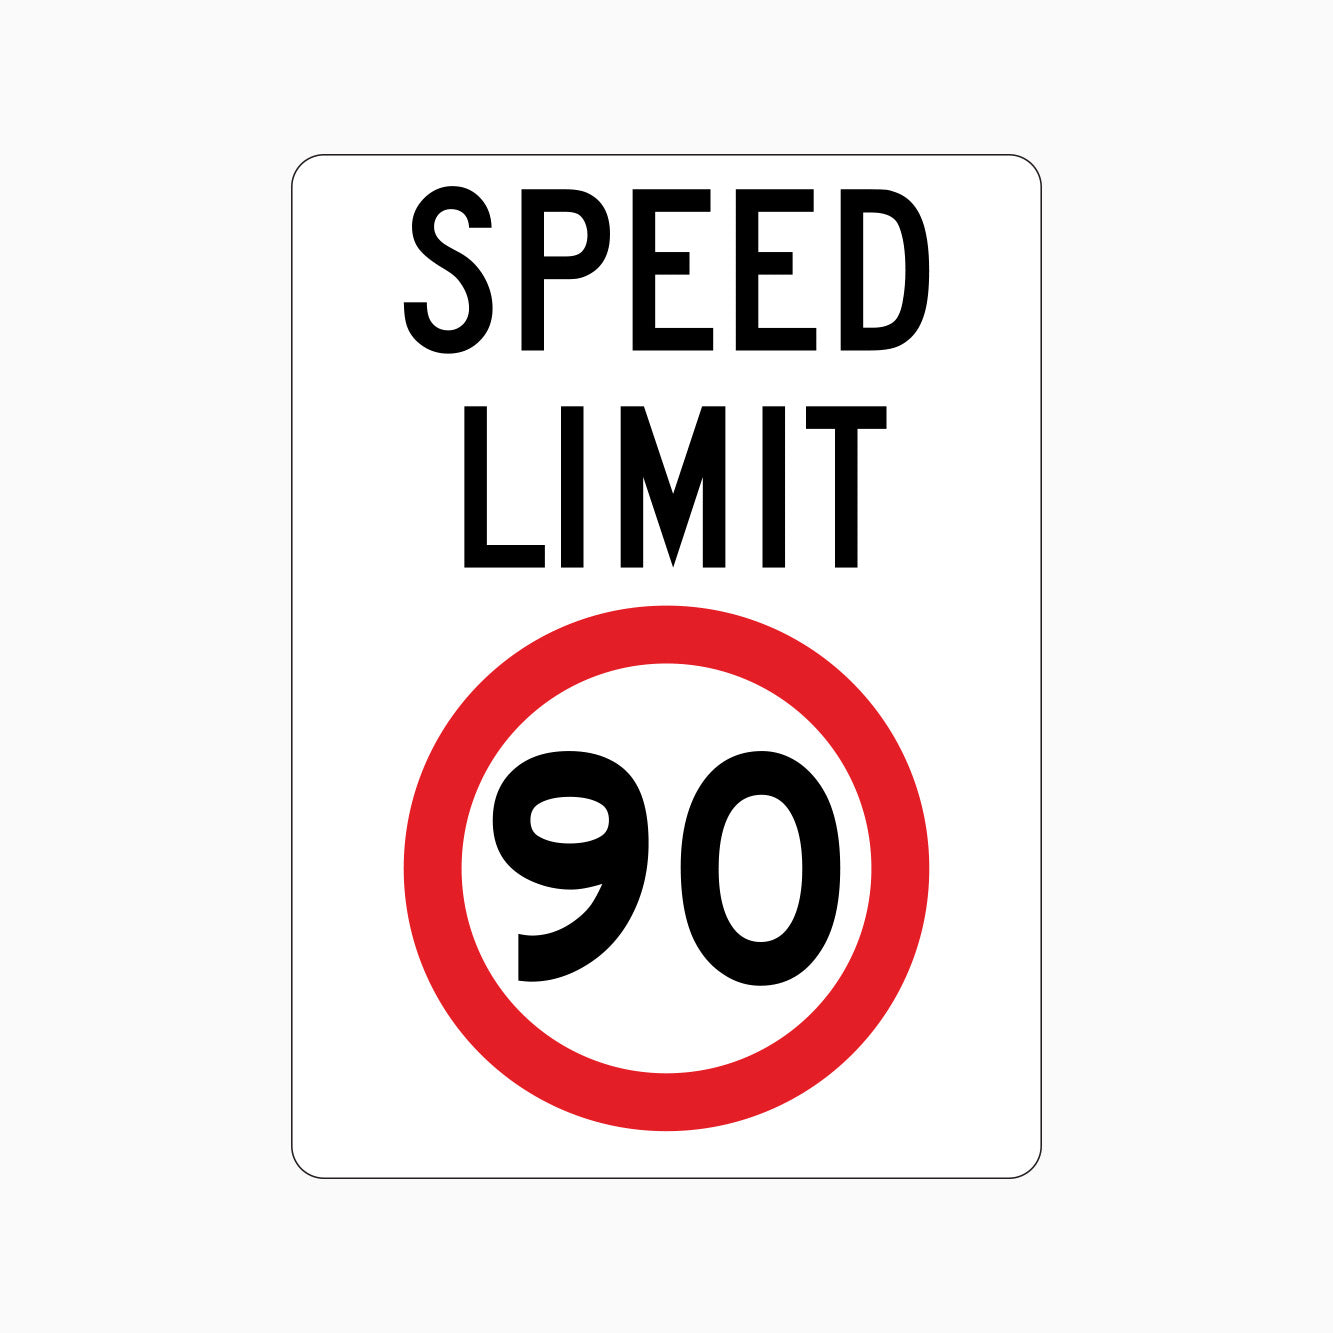 SPEED LIMIT 90km SIGN - GET SIGNS